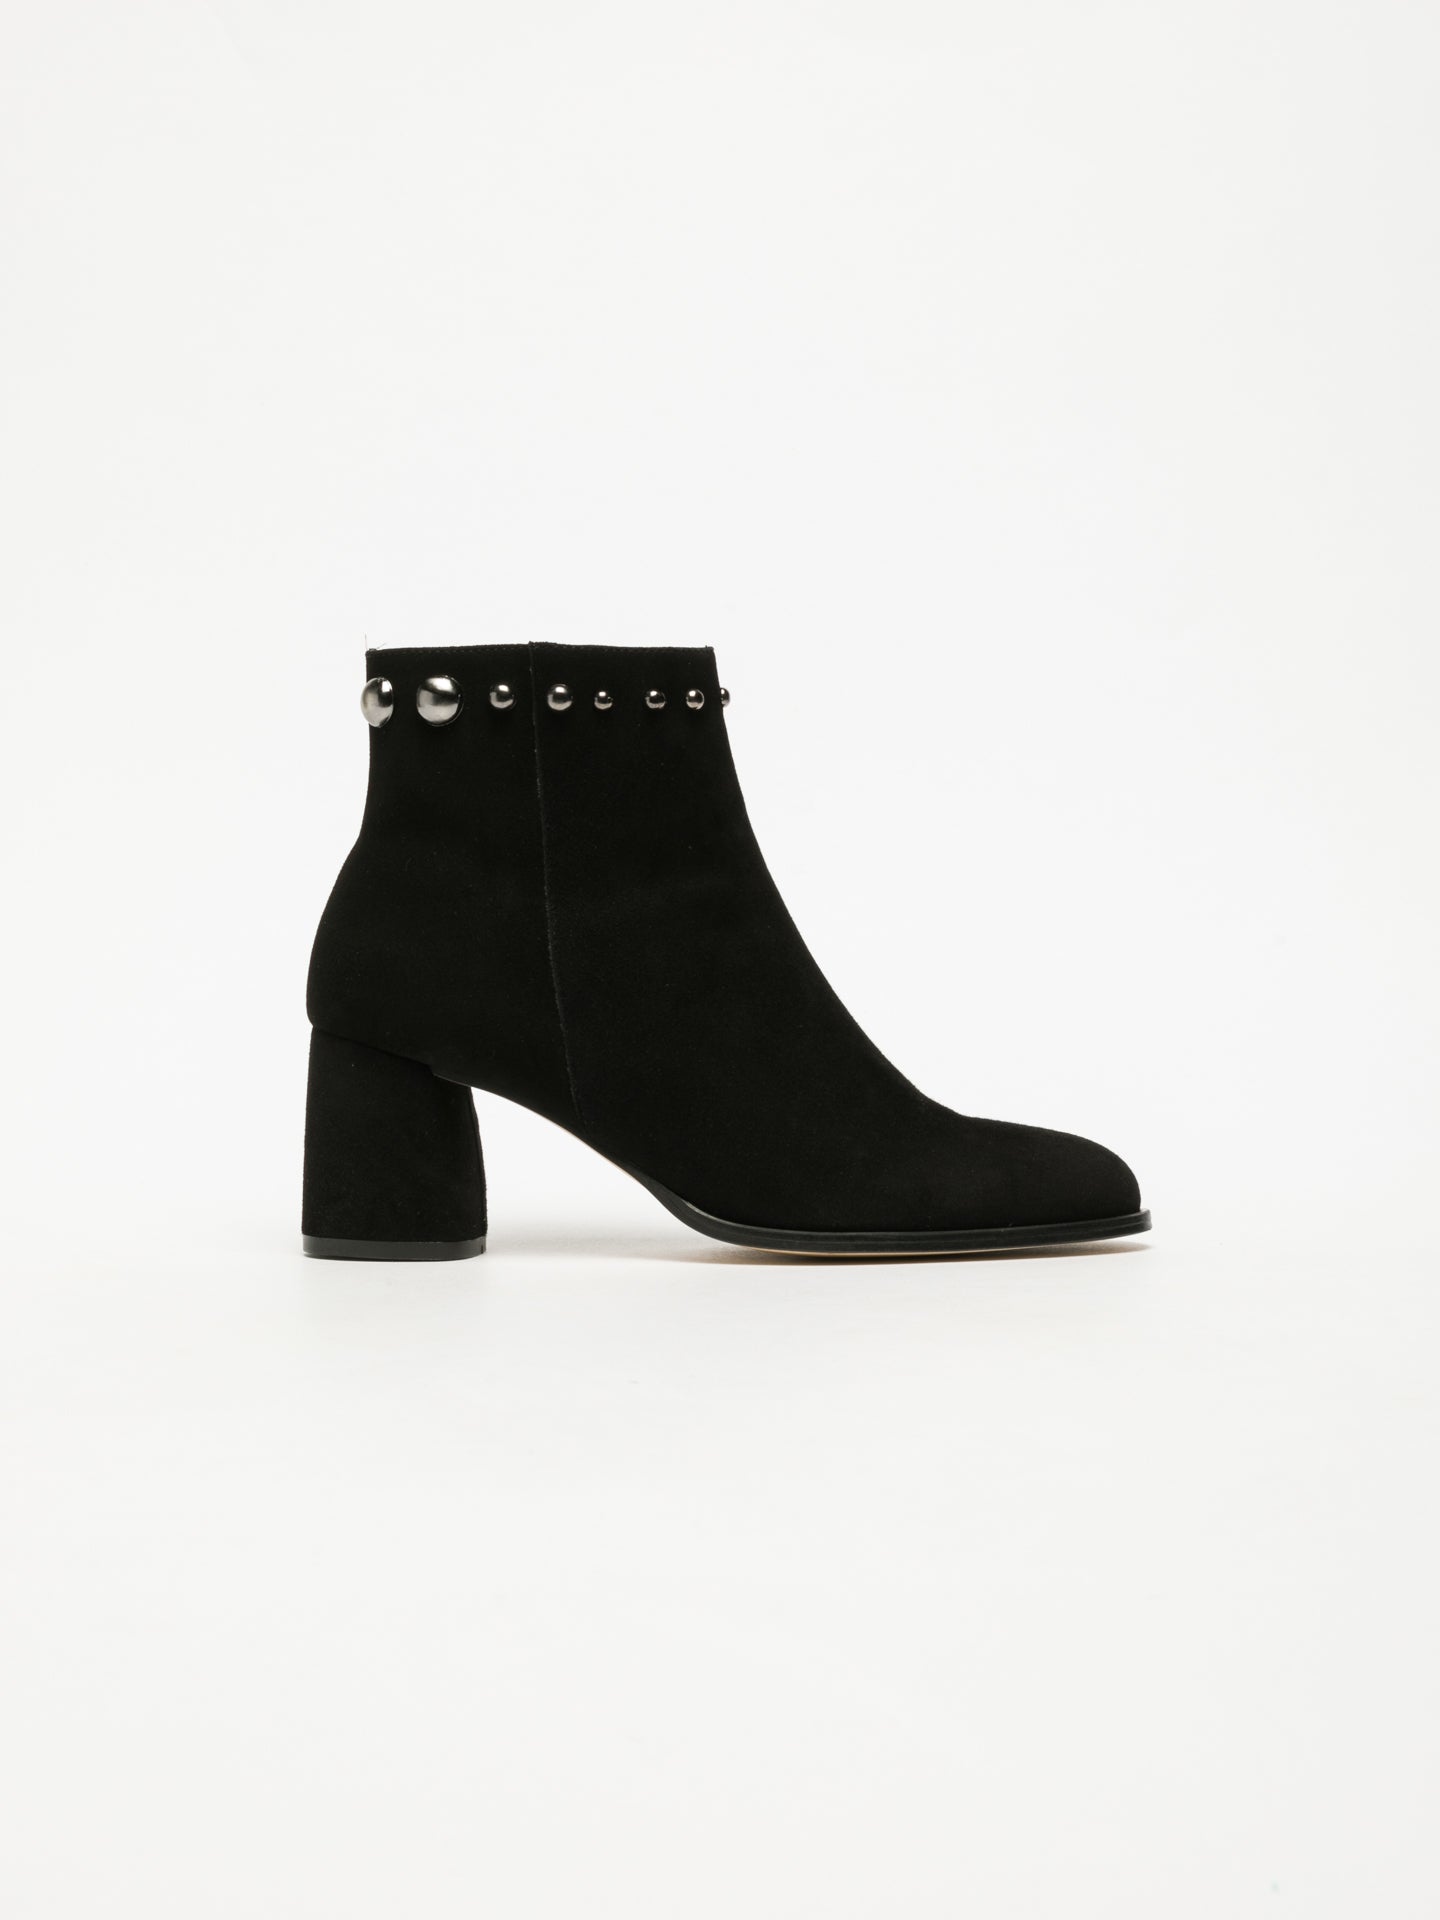 Sofia Costa Black Studded Ankle Boots